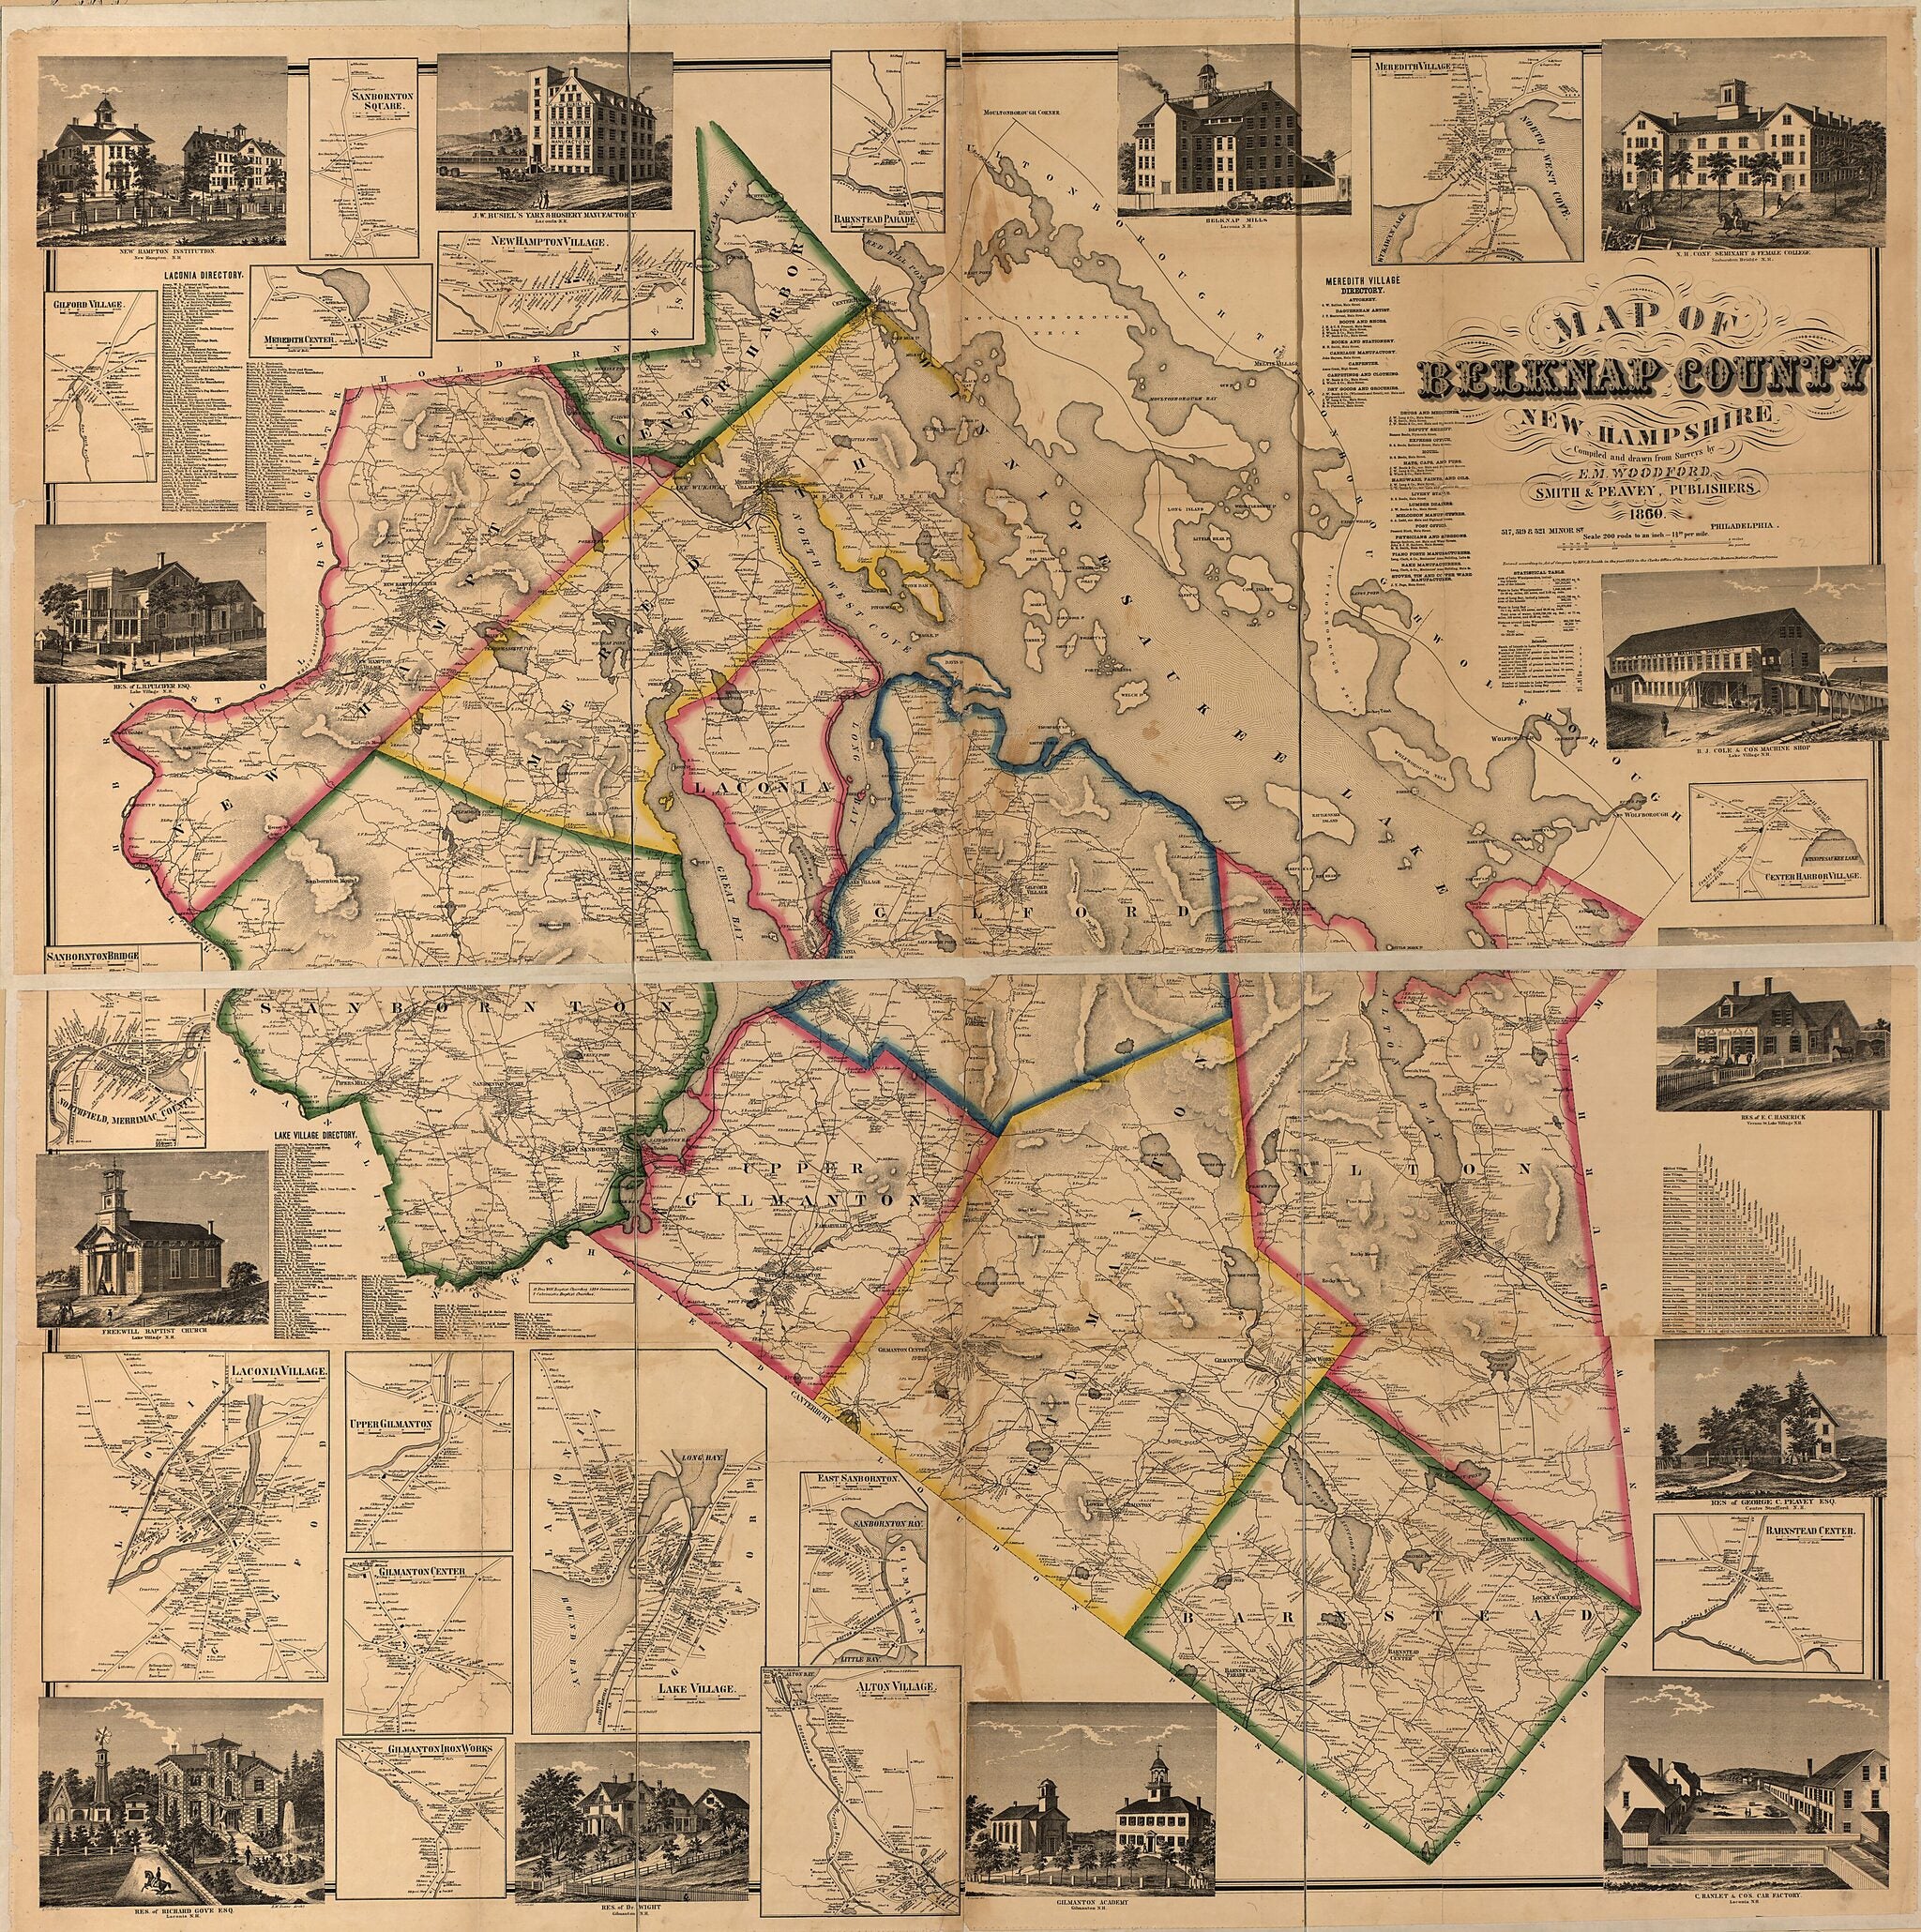 This old map of Map of Belknap County, New Hampshire from 1860 was created by  Smith &amp; Peavey, E. M. Woodford in 1860